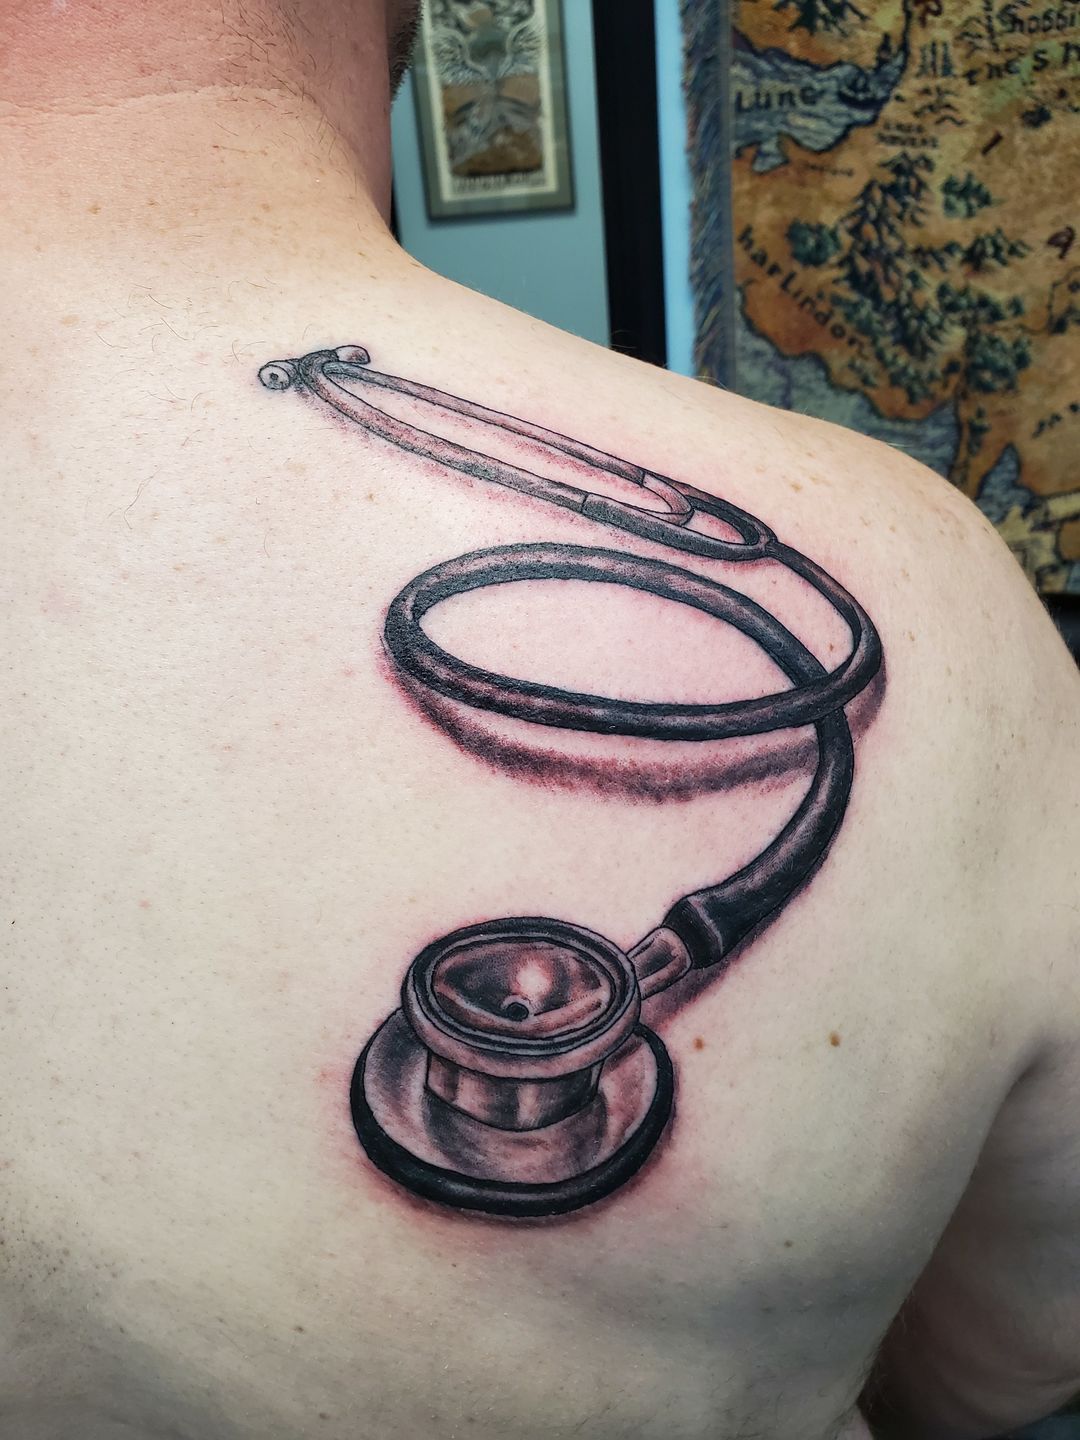 Catherine Terlop on Instagram: “Did this Alzheimer's awareness stethoscope  nursing themed tattoo today!” | Tattoos, Stethoscope tattoo, Feather tattoos